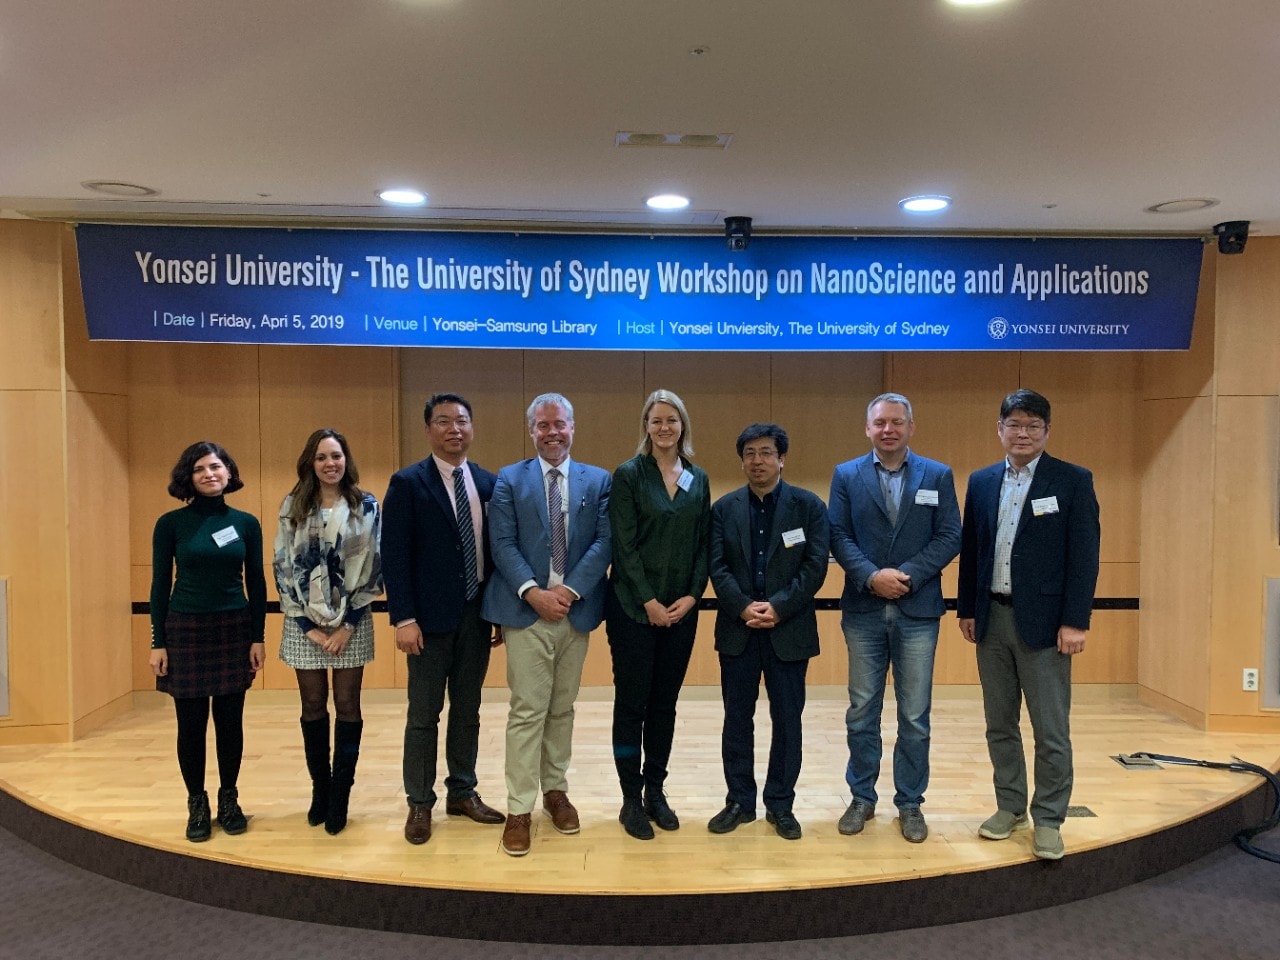 Nanoscience and application workshop with researchers from the University of Sydney and Yonsei University 